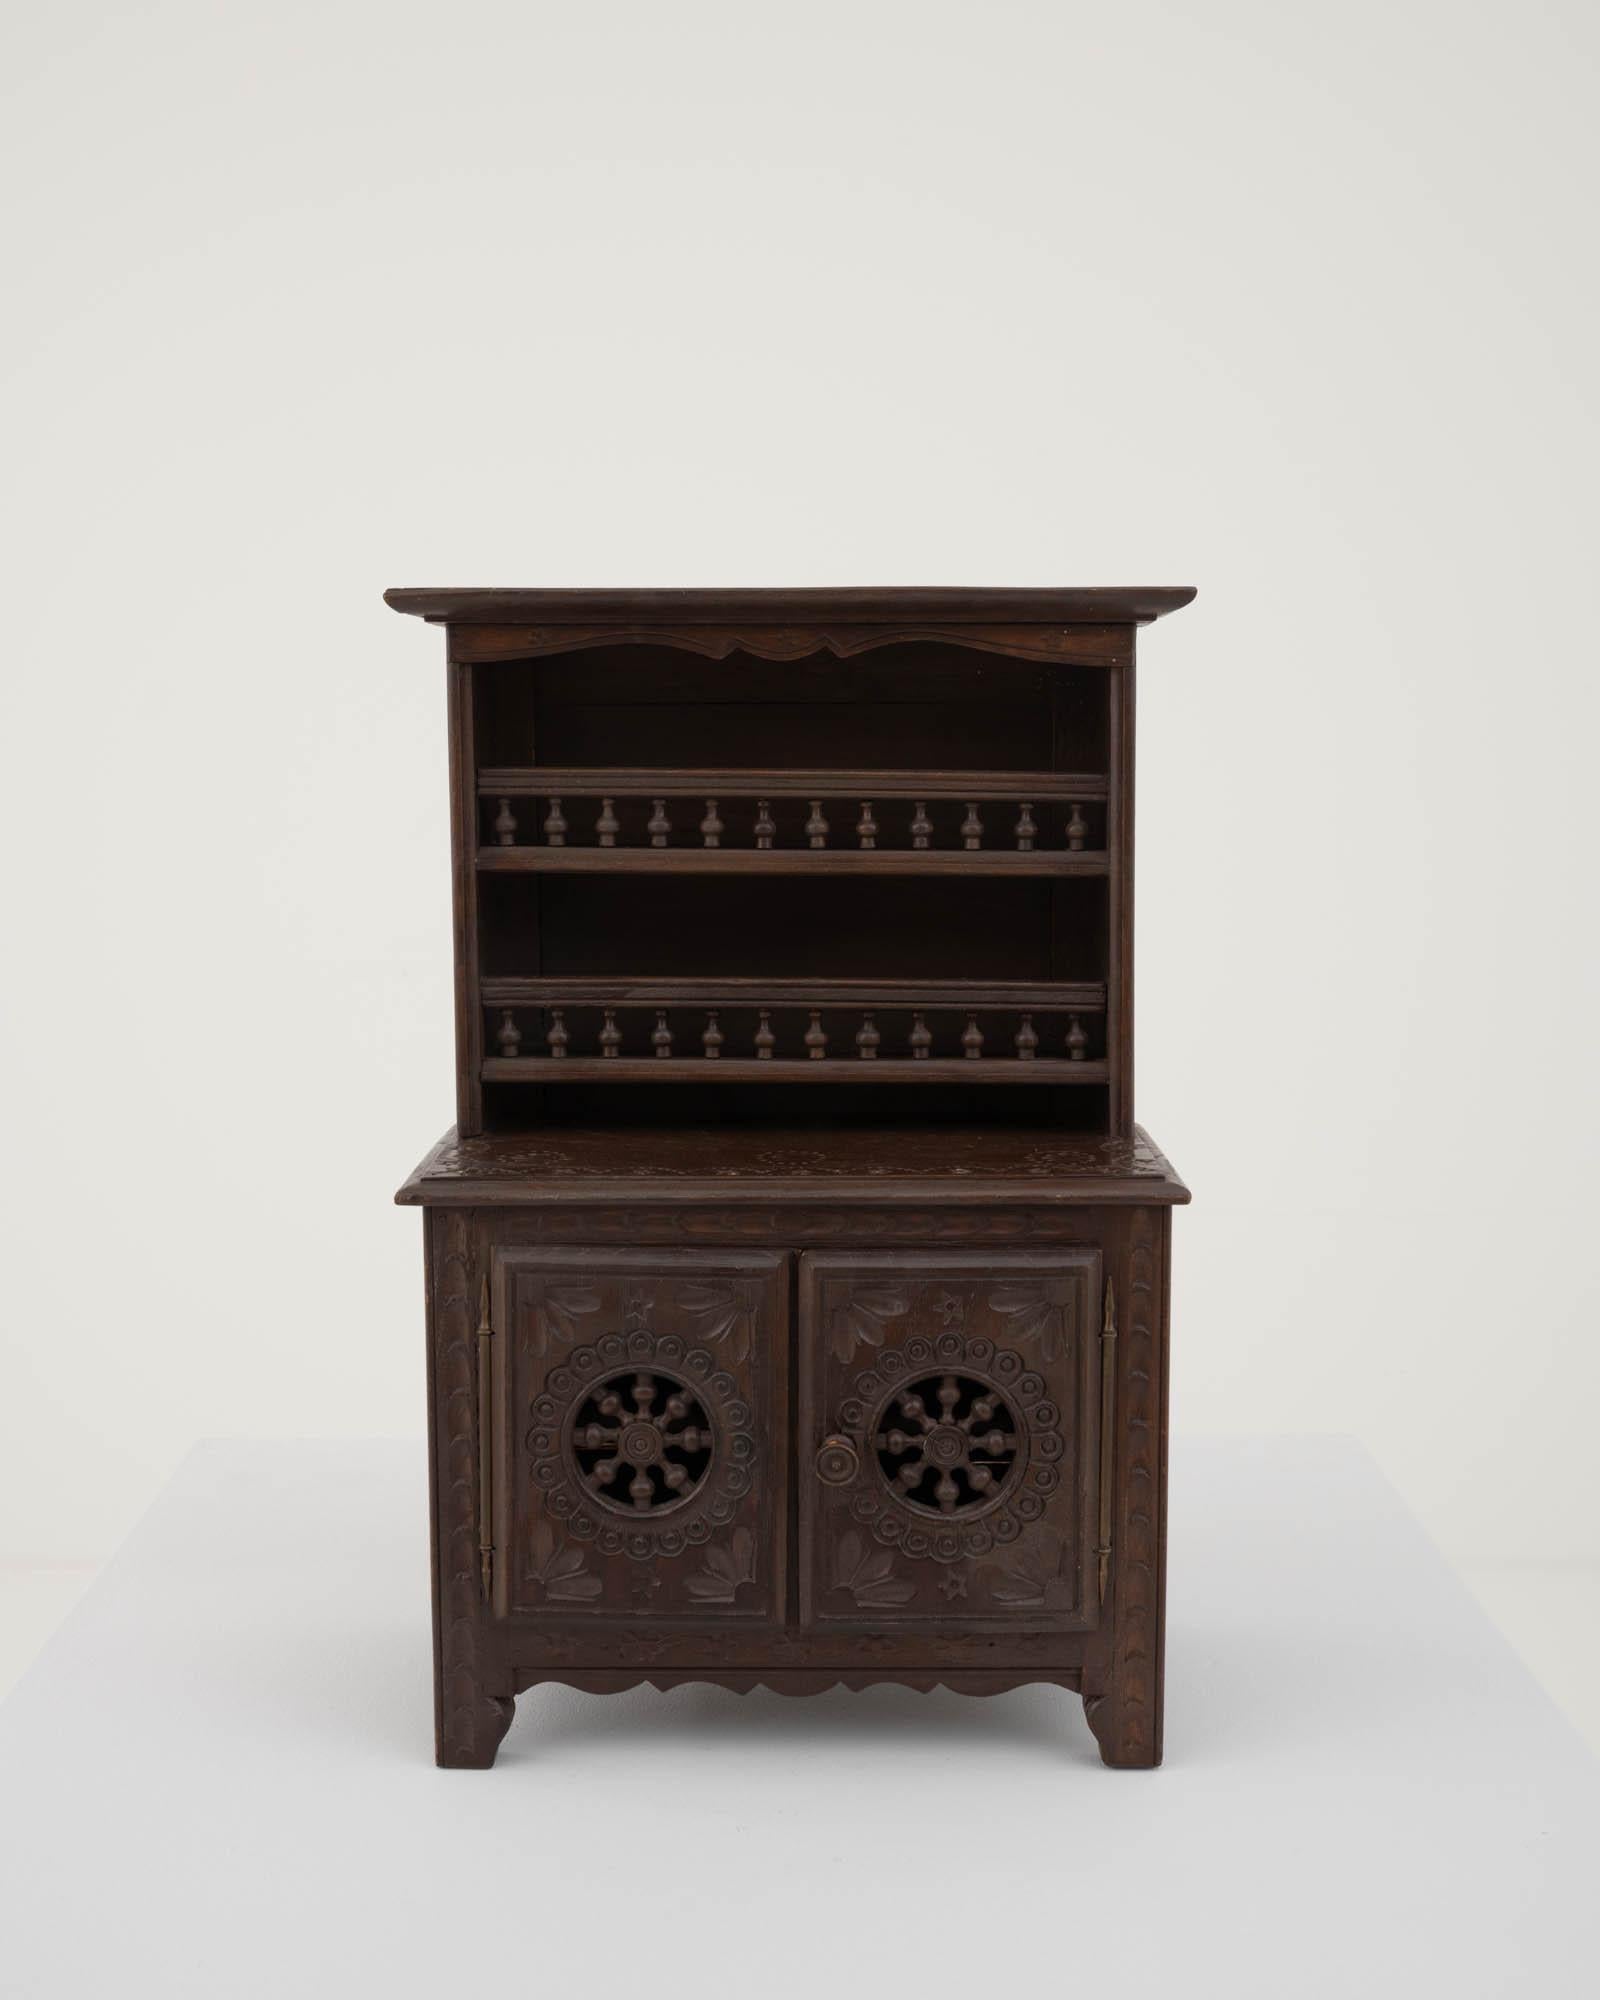 This highly eclectic piece takes influences from baroque to gothic to empire styles, sporting oriental reminiscences. This small cabinet is a product of a time when Europe started to trade with the Far East, new styles were on the rise, coming from